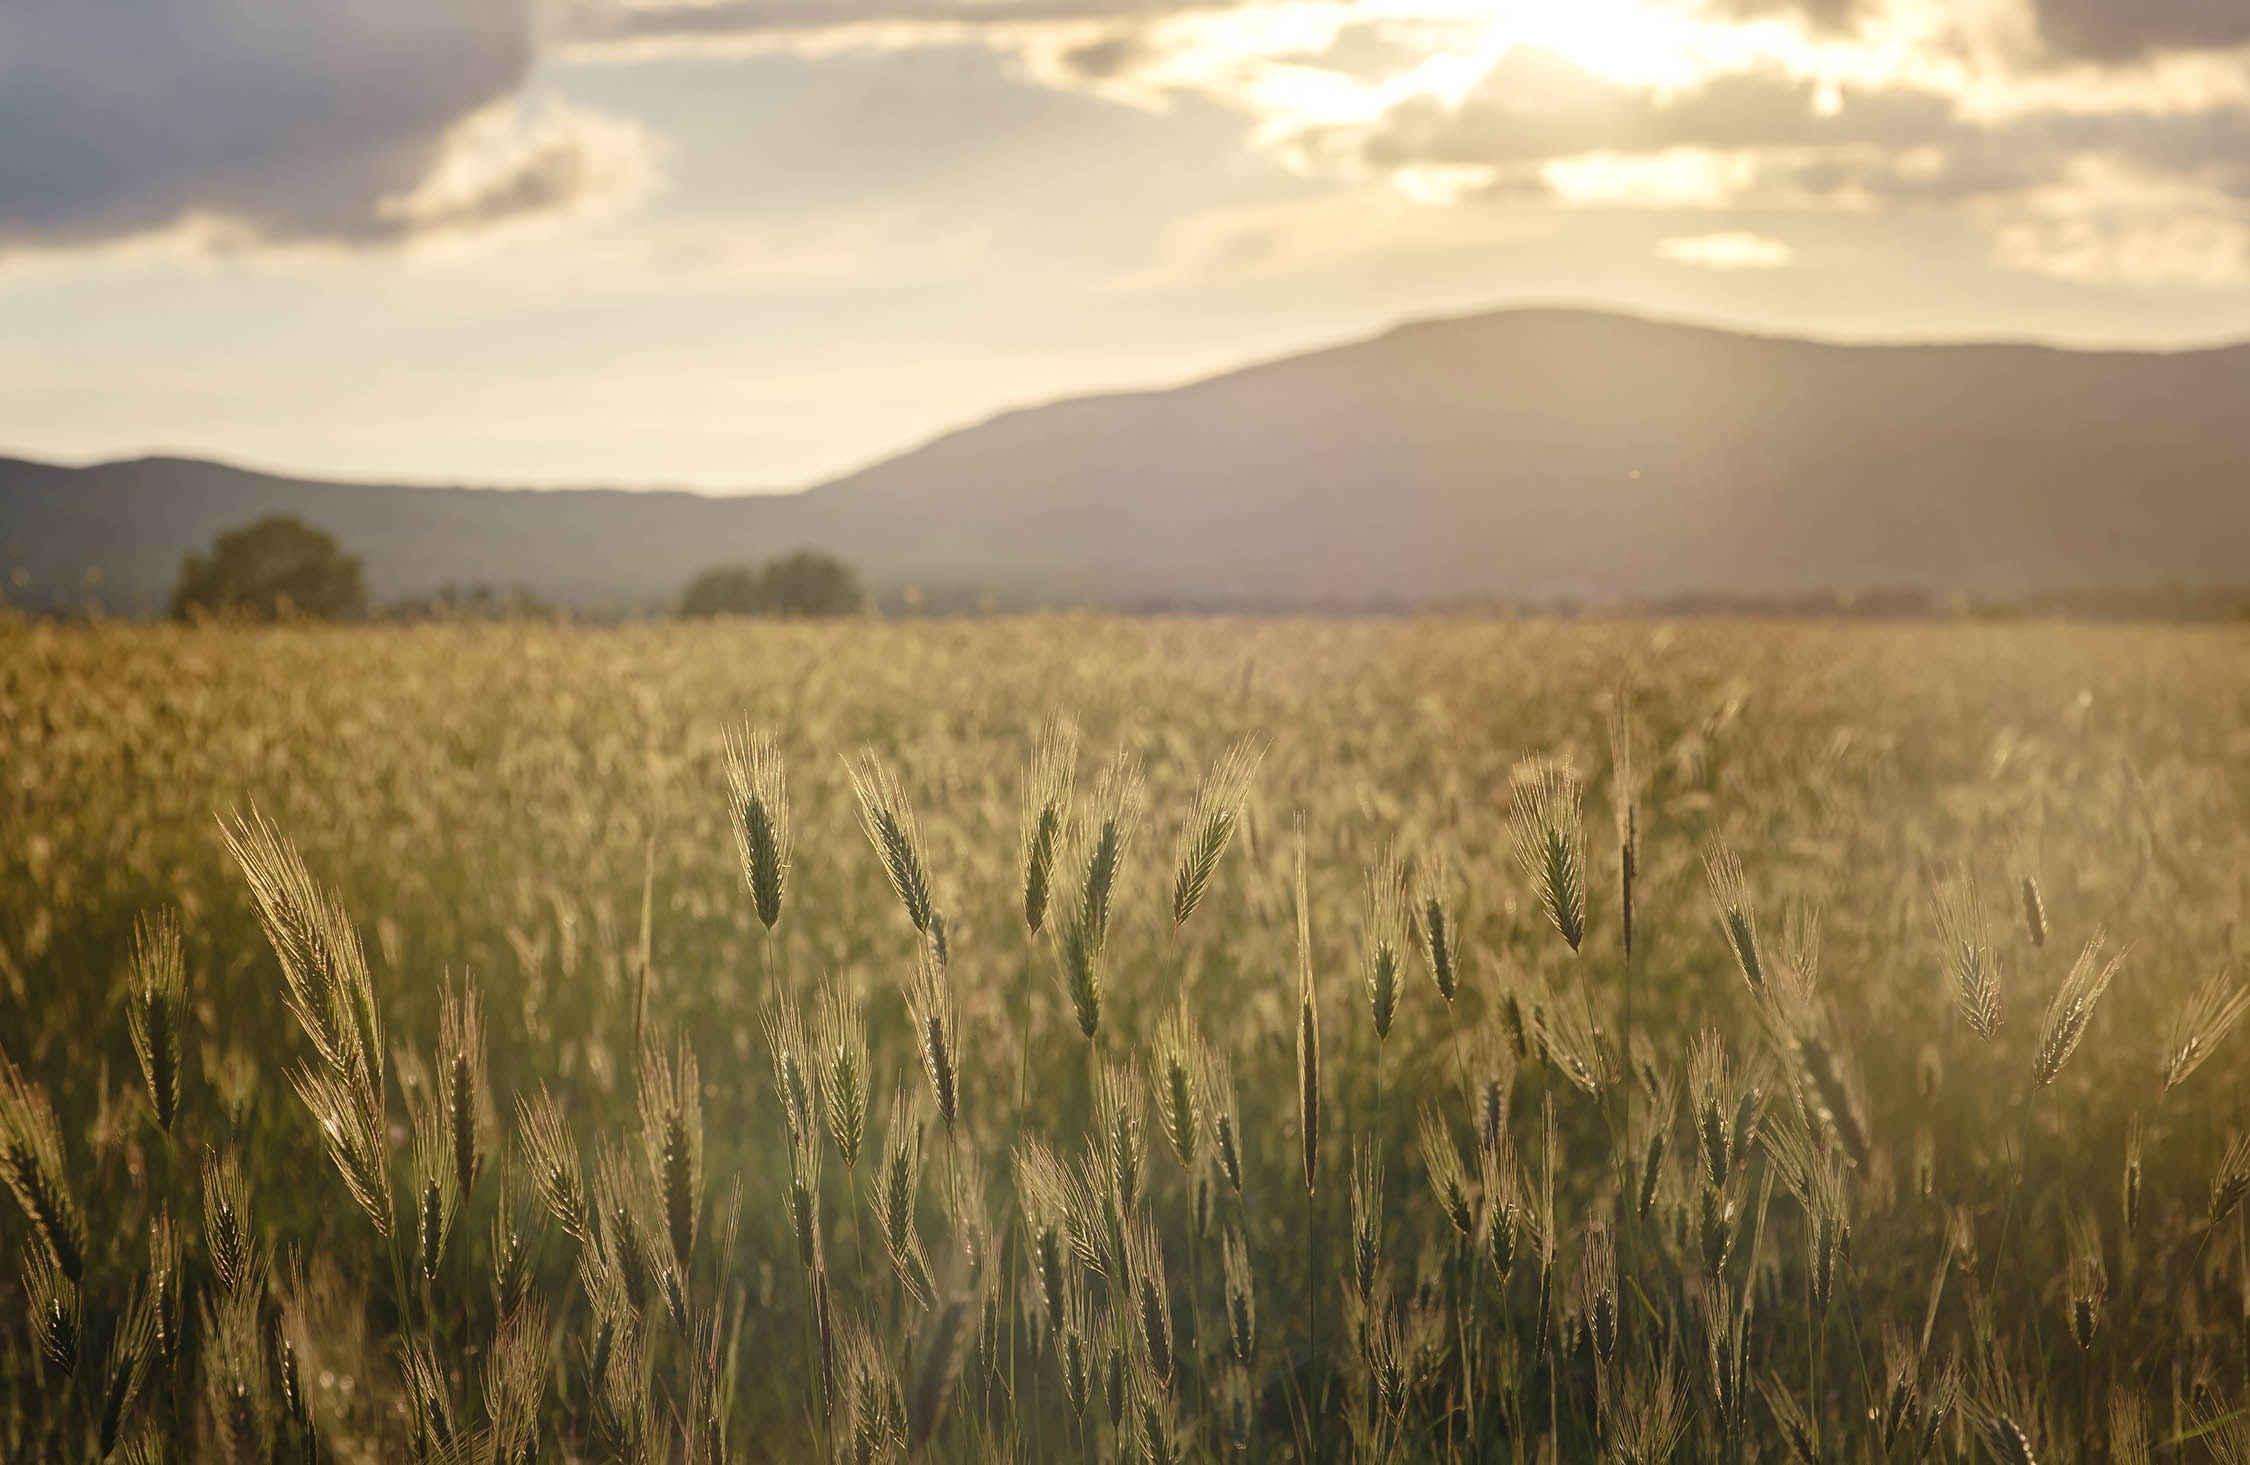 Scene of sunset or sunrise on the field with young rye or wheat in the summer with a cloudy sky background. Landscape. Shoot with Shallow Depth Of field.